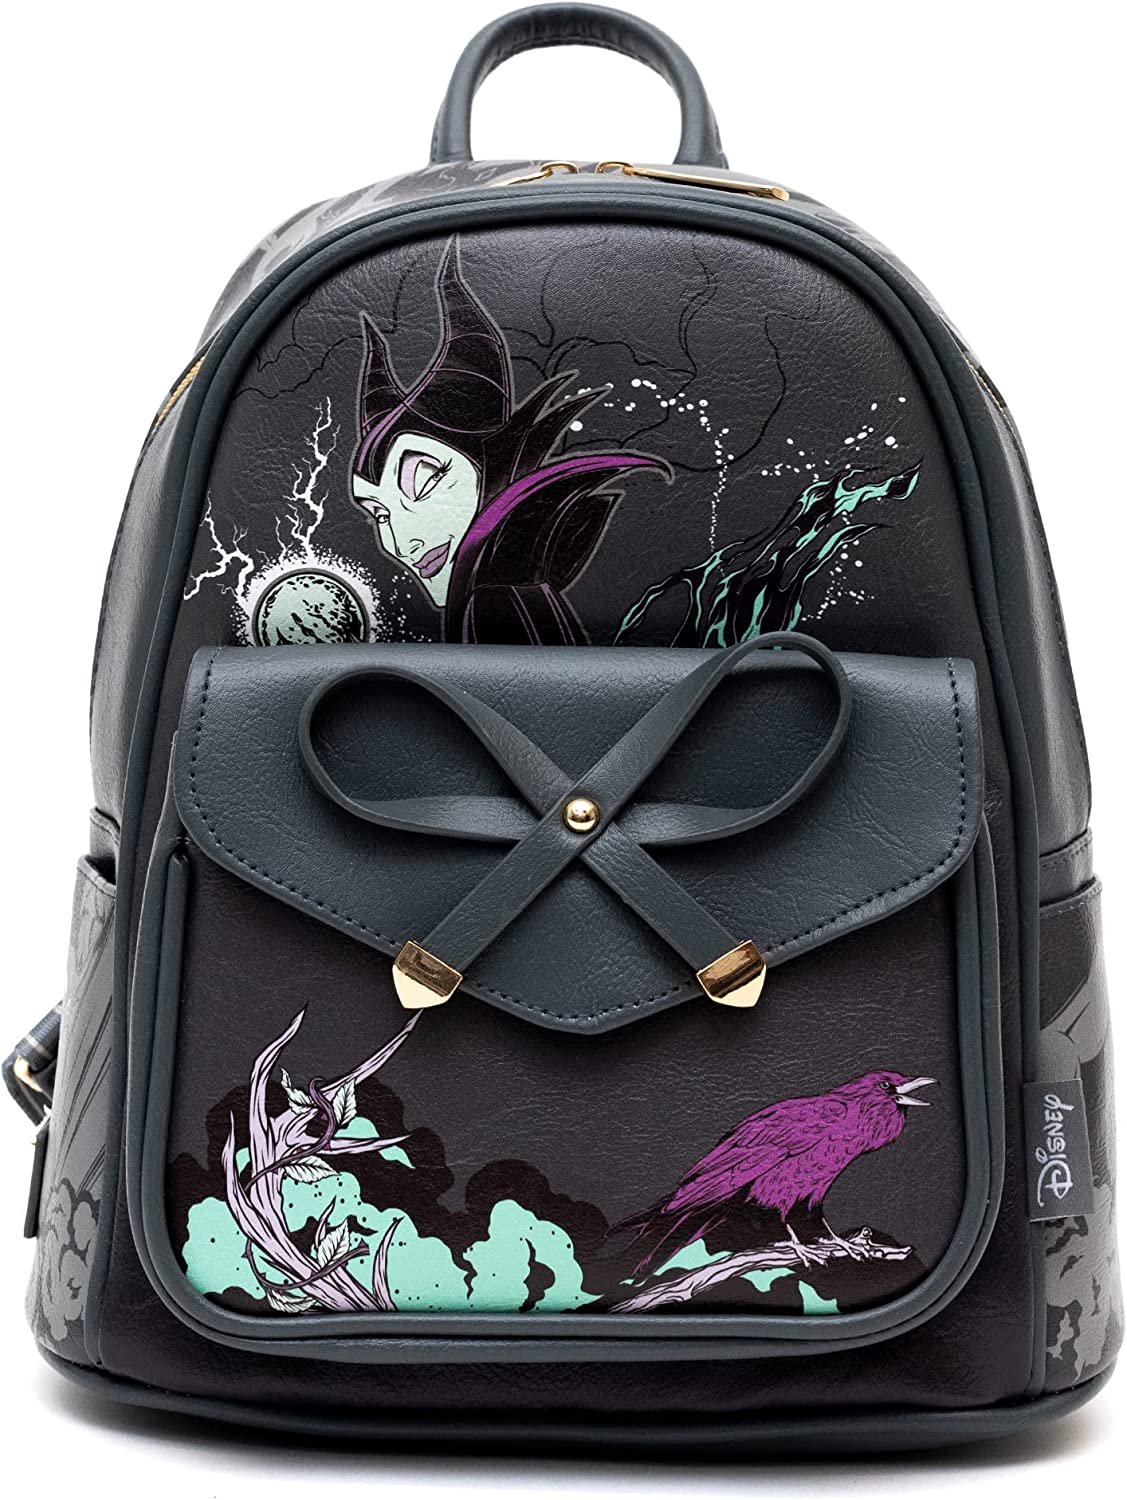 Loungefly Disney Villains Maleficent Figural Mini Backpack